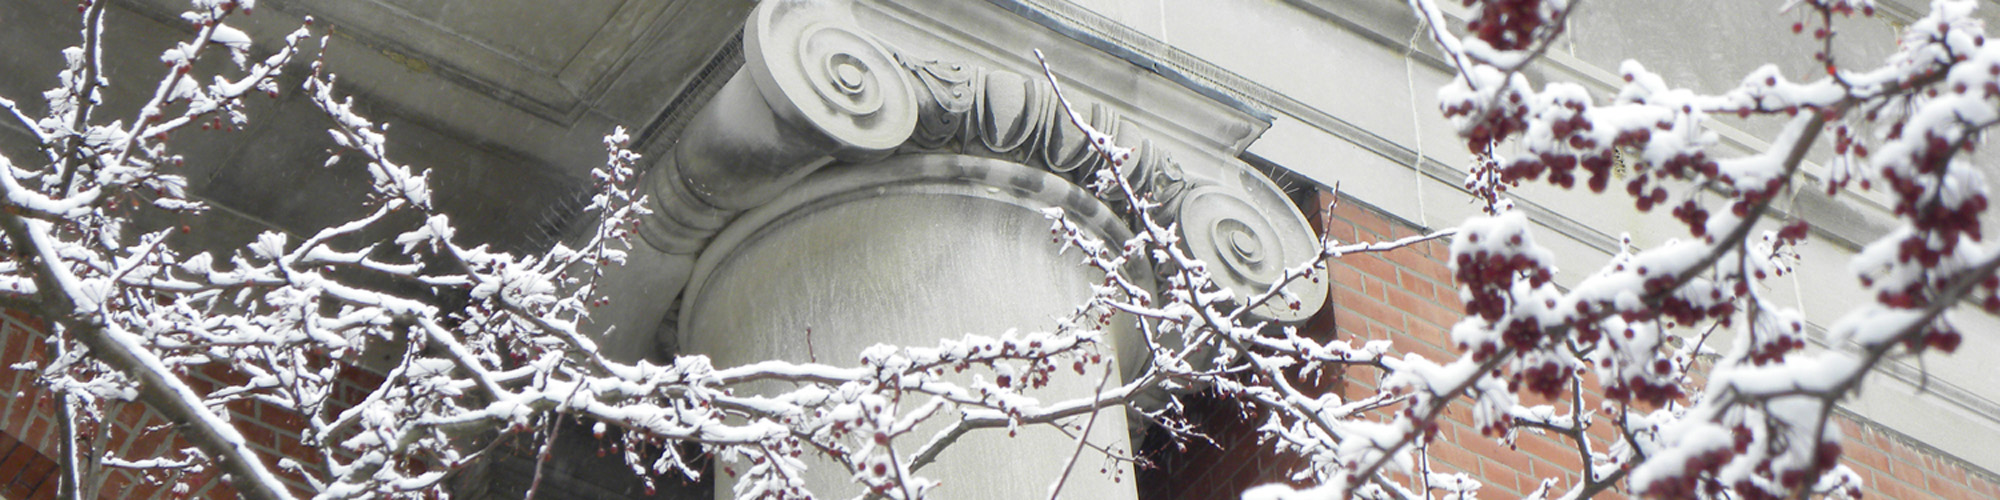 Snow outside Old Main